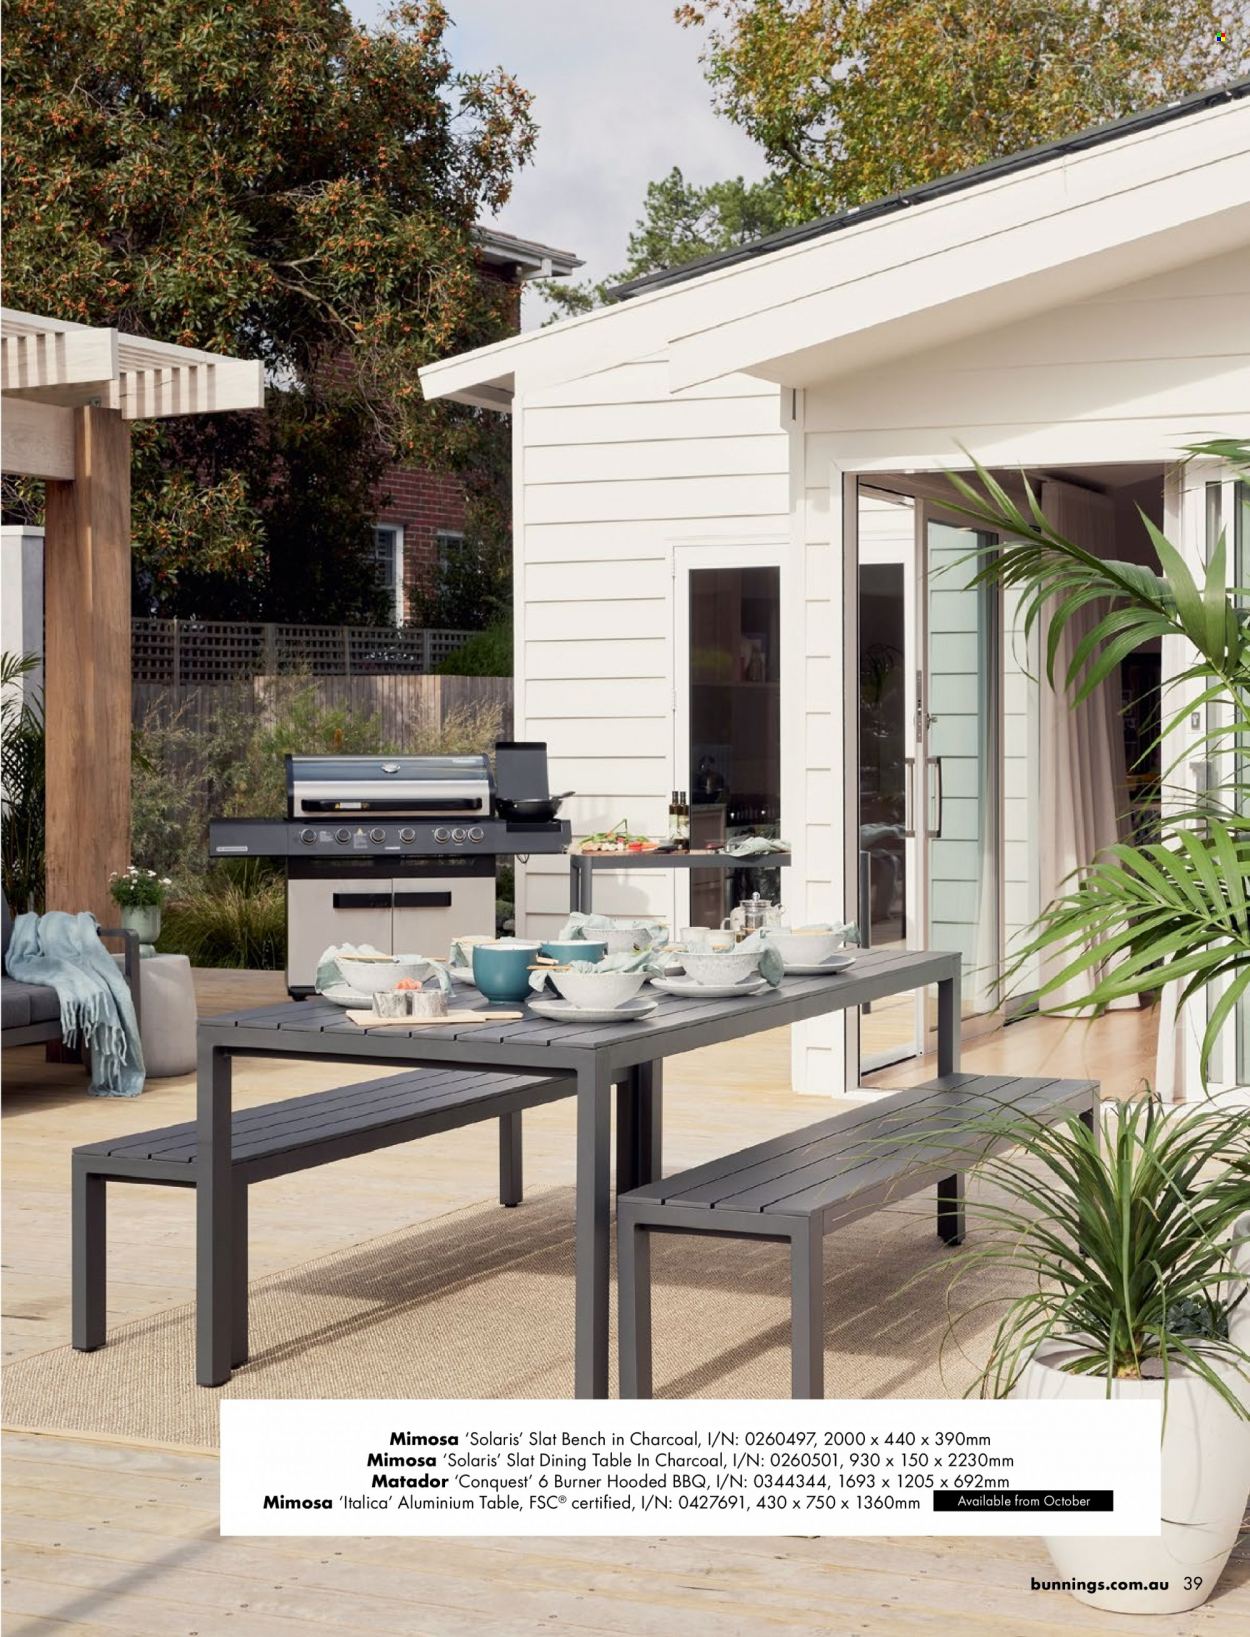 thumbnail - Bunnings Warehouse Catalogue - Sales products - dining table, table, bench, charcoal. Page 39.